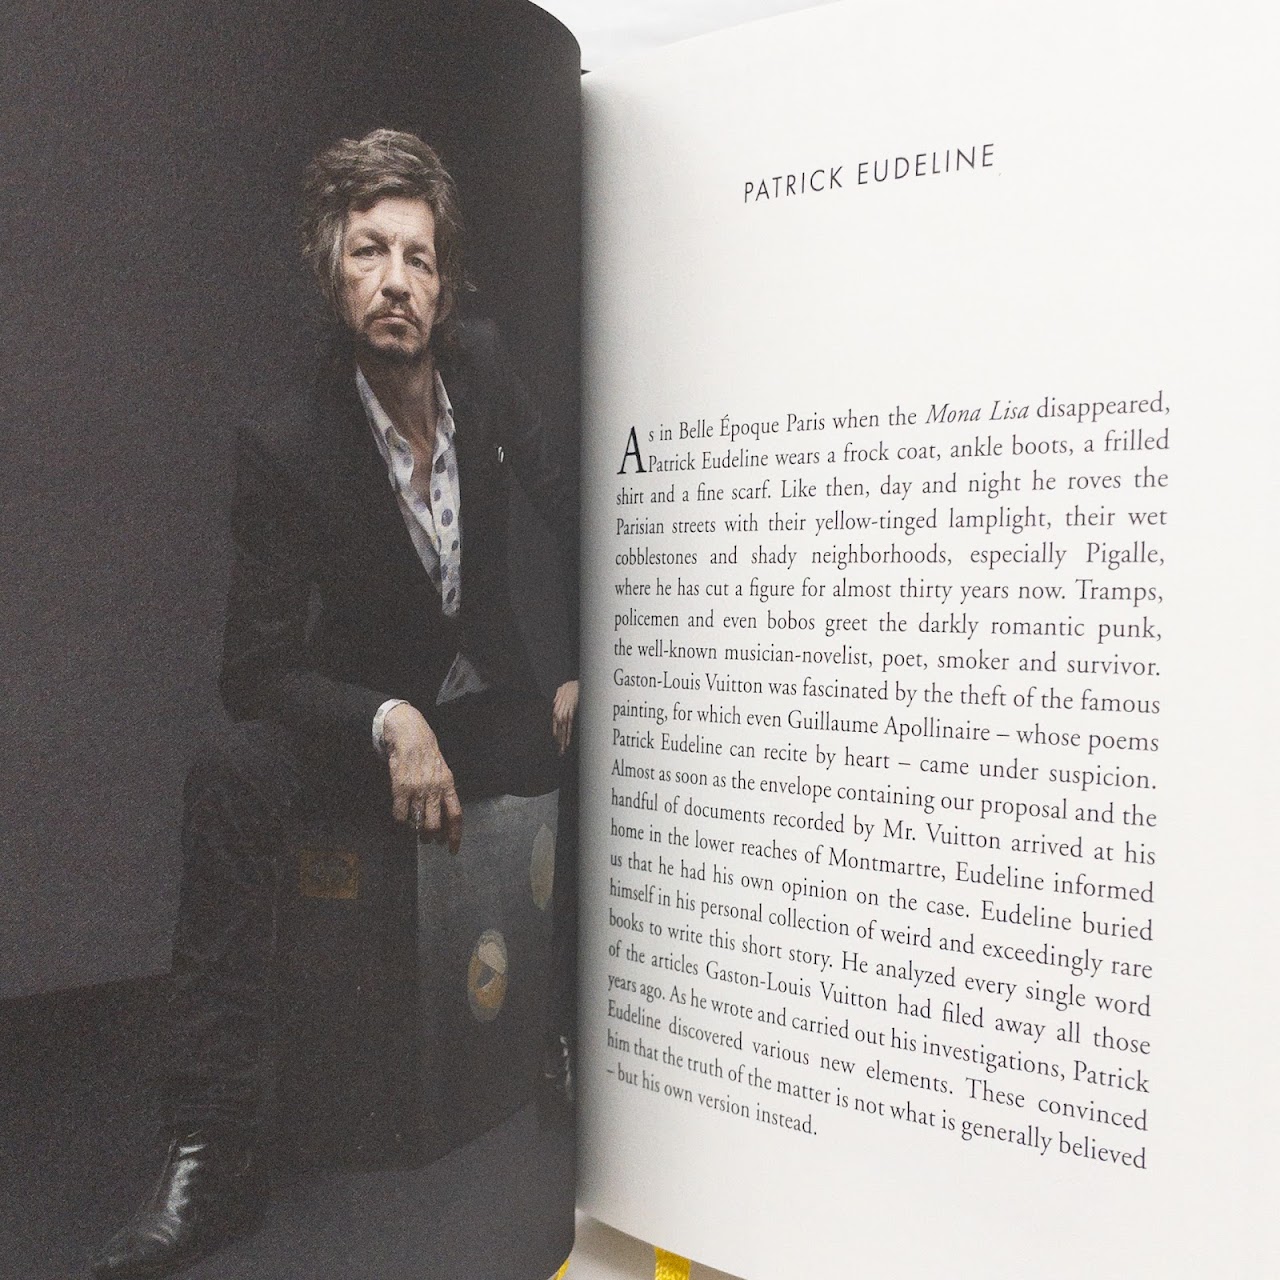 The Trunk: Short Stories By Louis Vuitton Deluxe Book